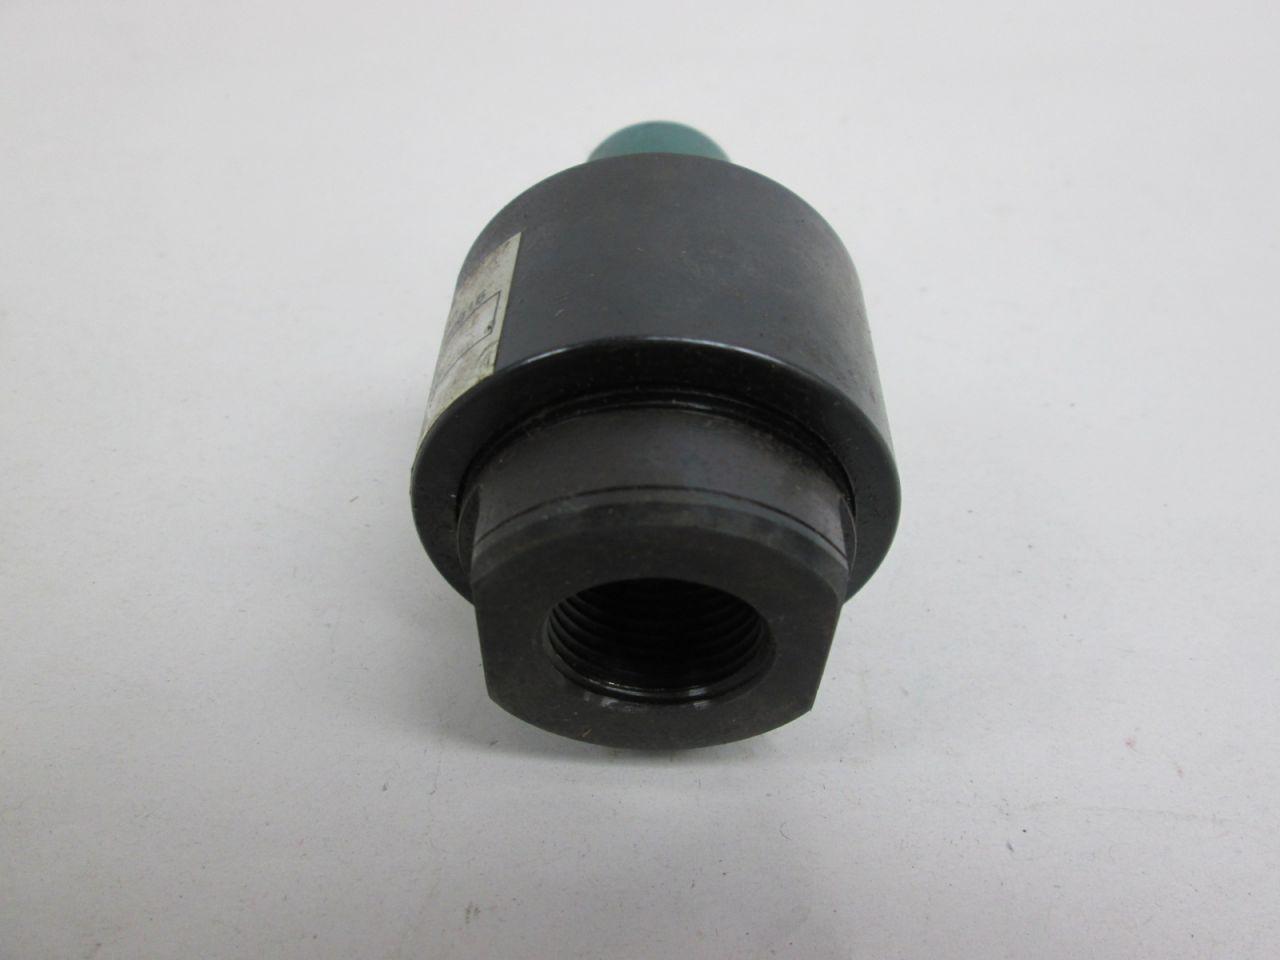 1347570088 CYLINDER ALIGNMENT COUPLER. NEW OTHER PARKER LC-1-14A 